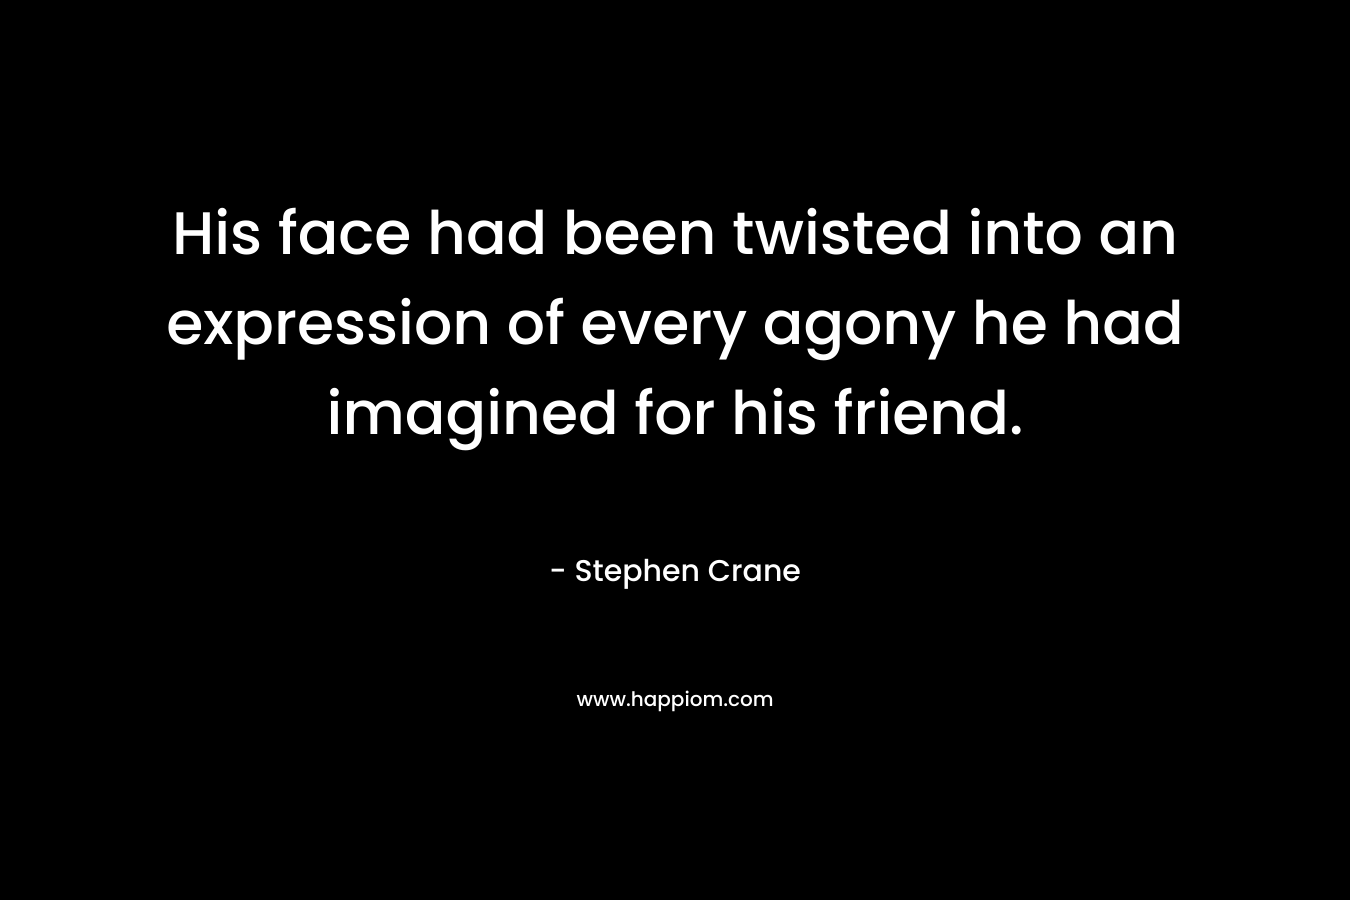 His face had been twisted into an expression of every agony he had imagined for his friend.